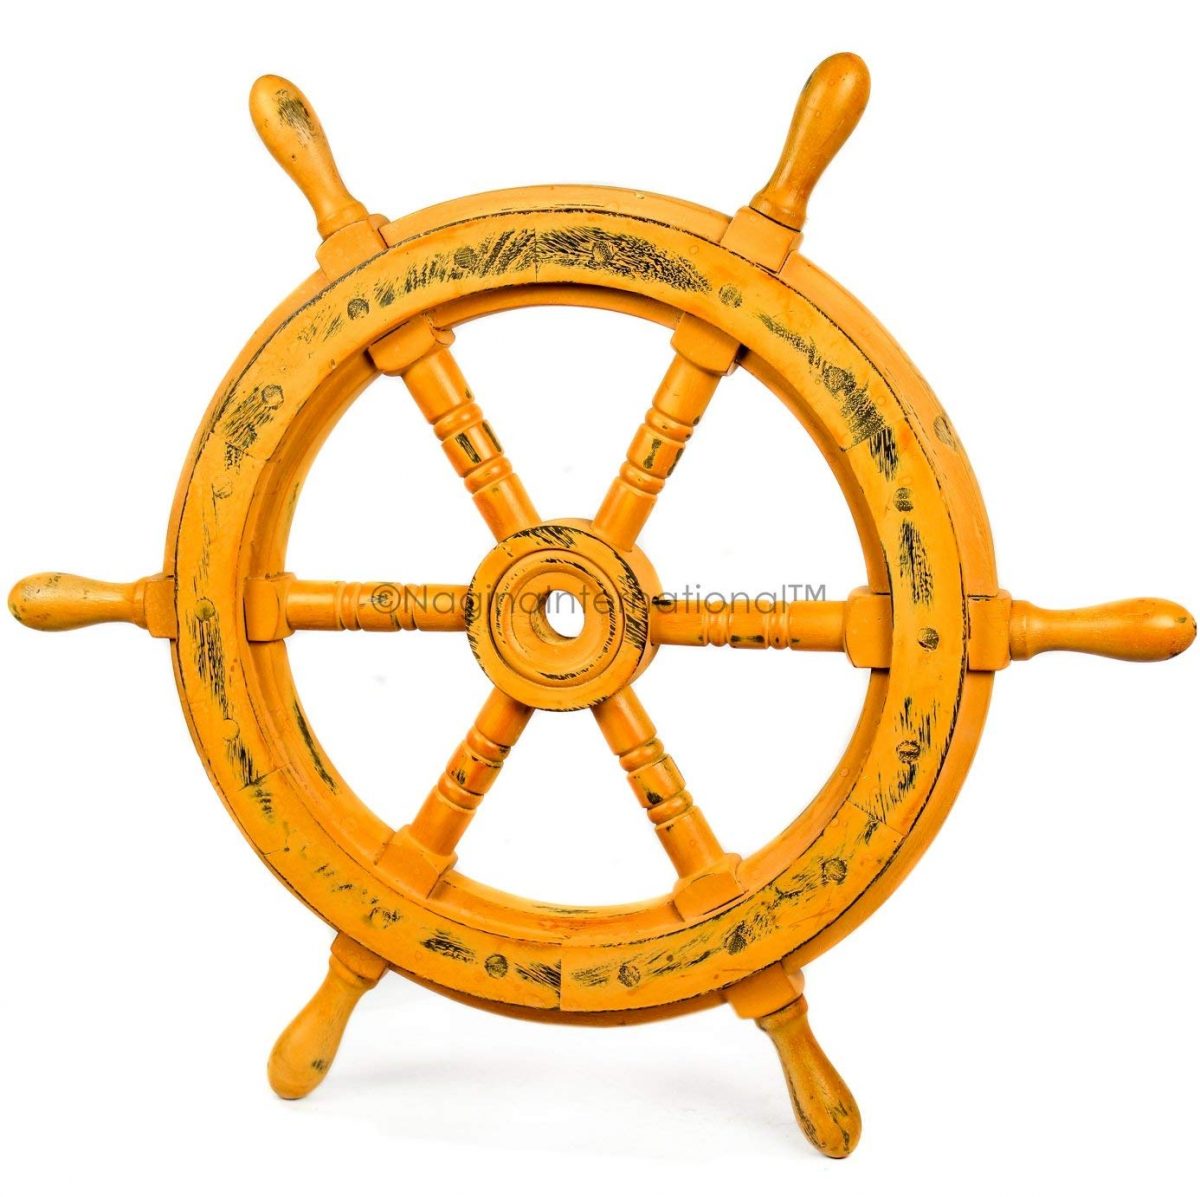  Nagina International Welcome Aboard Embedded Premium  Handcrafted Nautical Pirate's Wall Decor Ship Wheel (24 Inches, Wooden  Handle) : Home & Kitchen